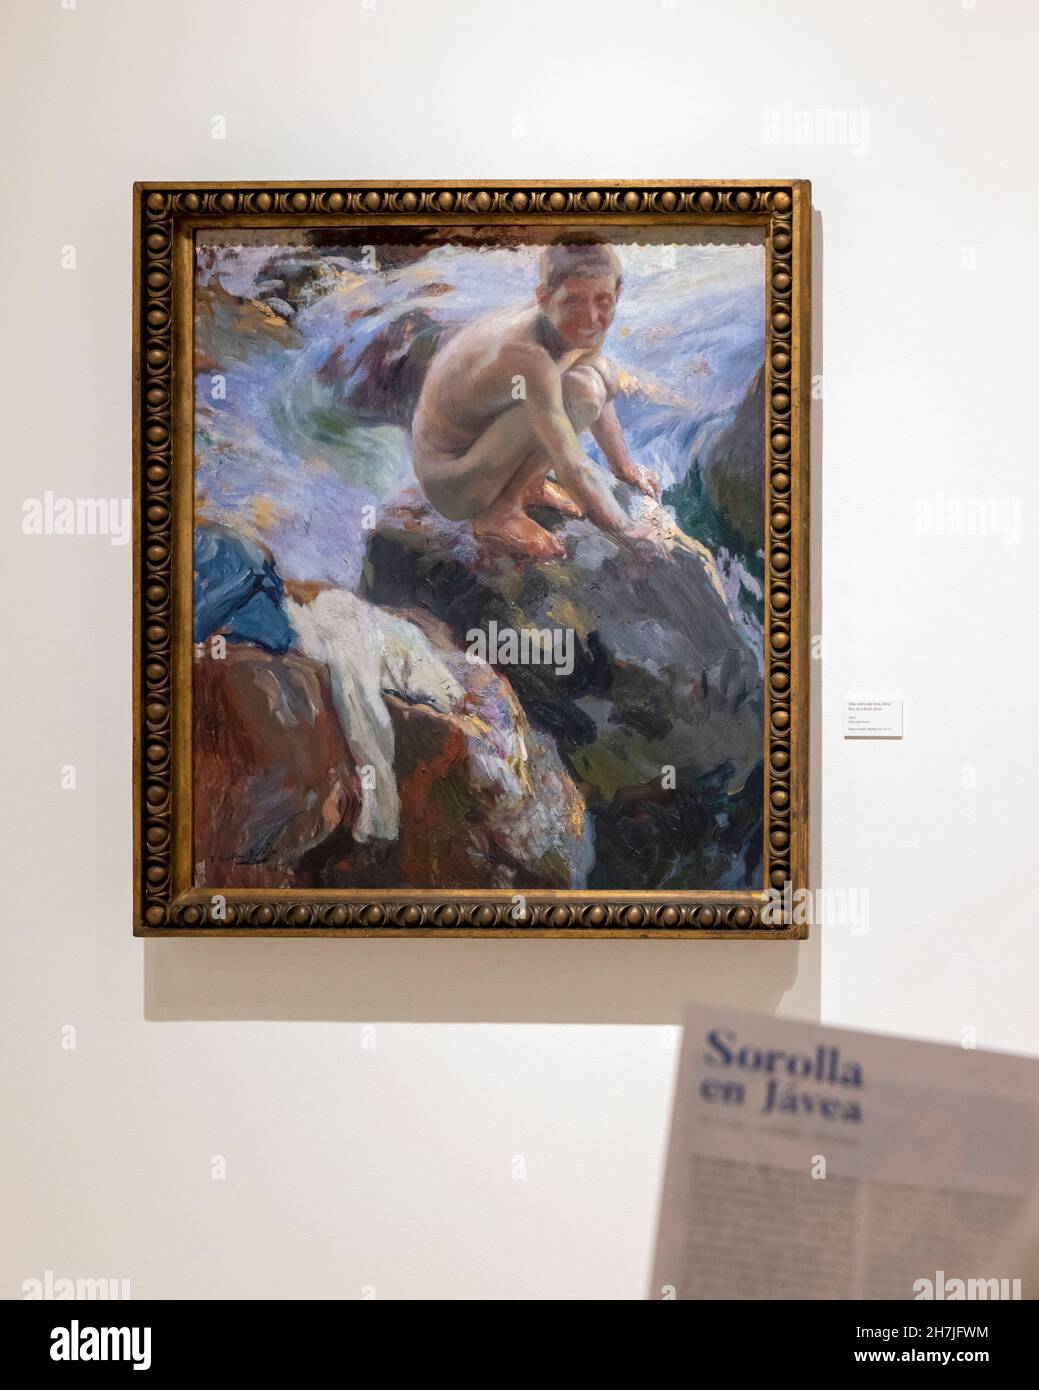 Museum joaquin sorolla - images photography painter hi-res Alamy and stock